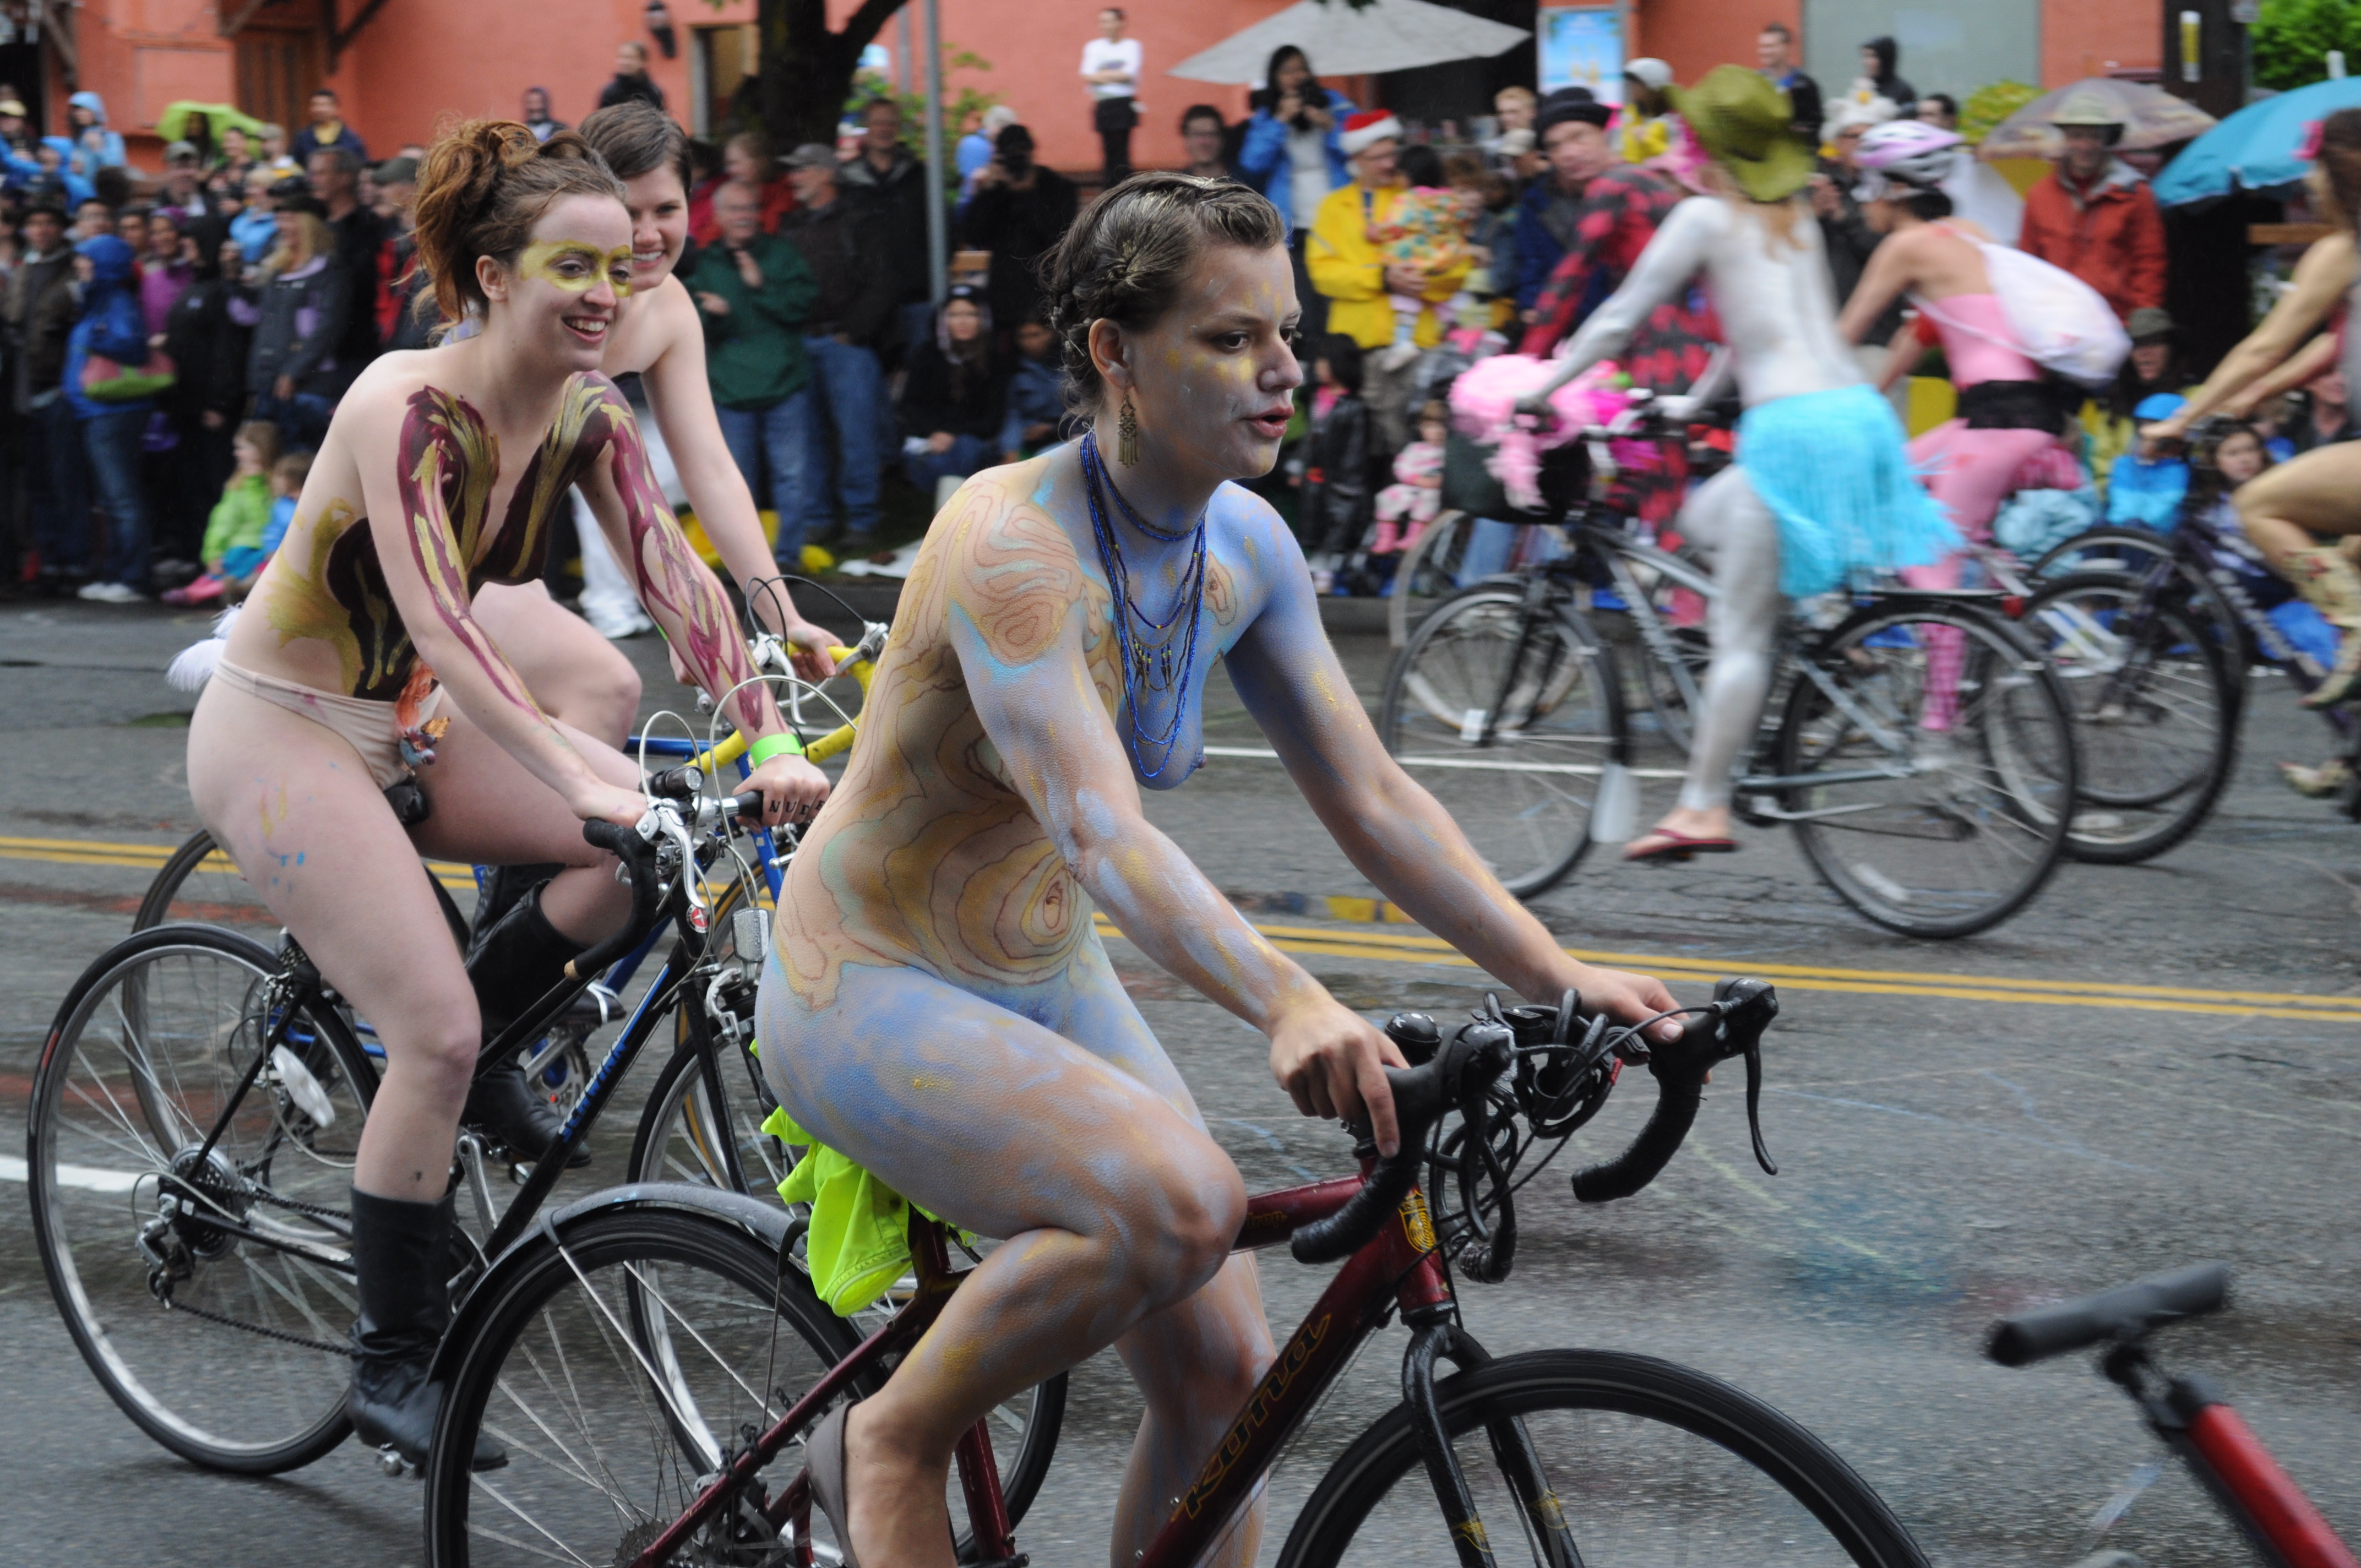 Fremont summer solstice parade : naked cyclists in seattle